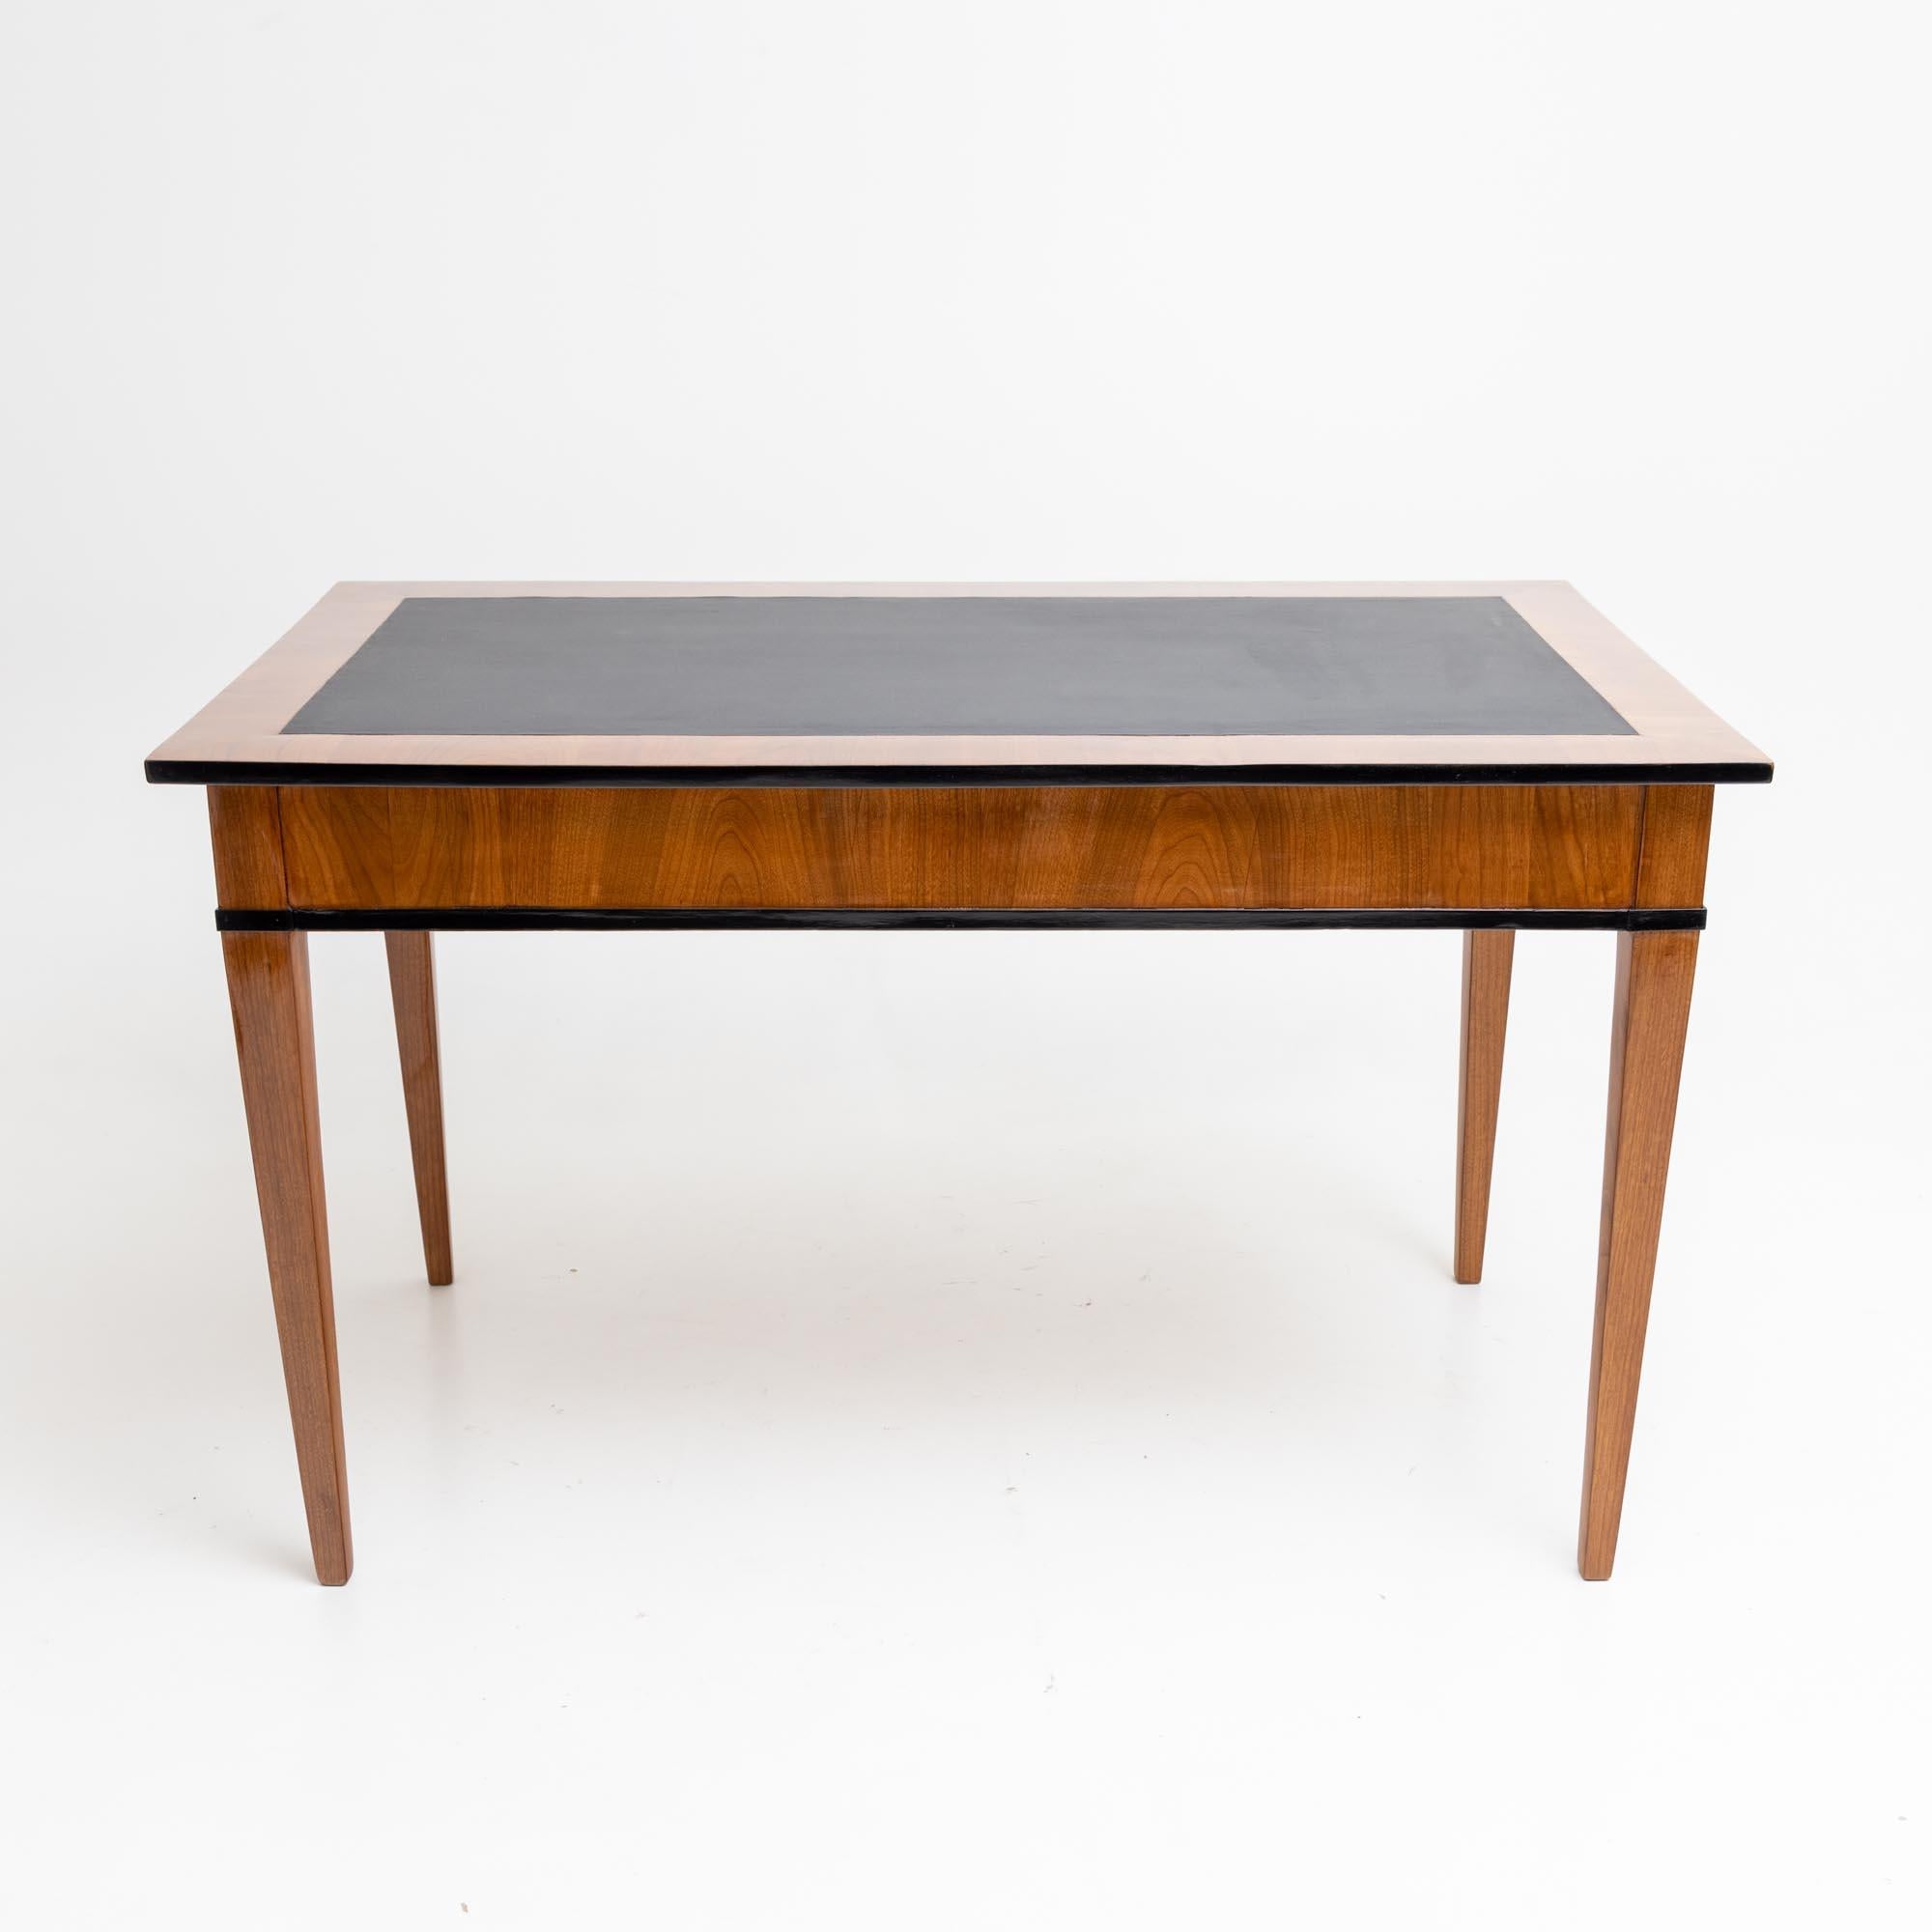 Desk in cherry veneer on high square legs with straight frame and two drawers. The edges are ebonised, the writing surface is covered with black imitation leather. Restored and hand-polished condition.